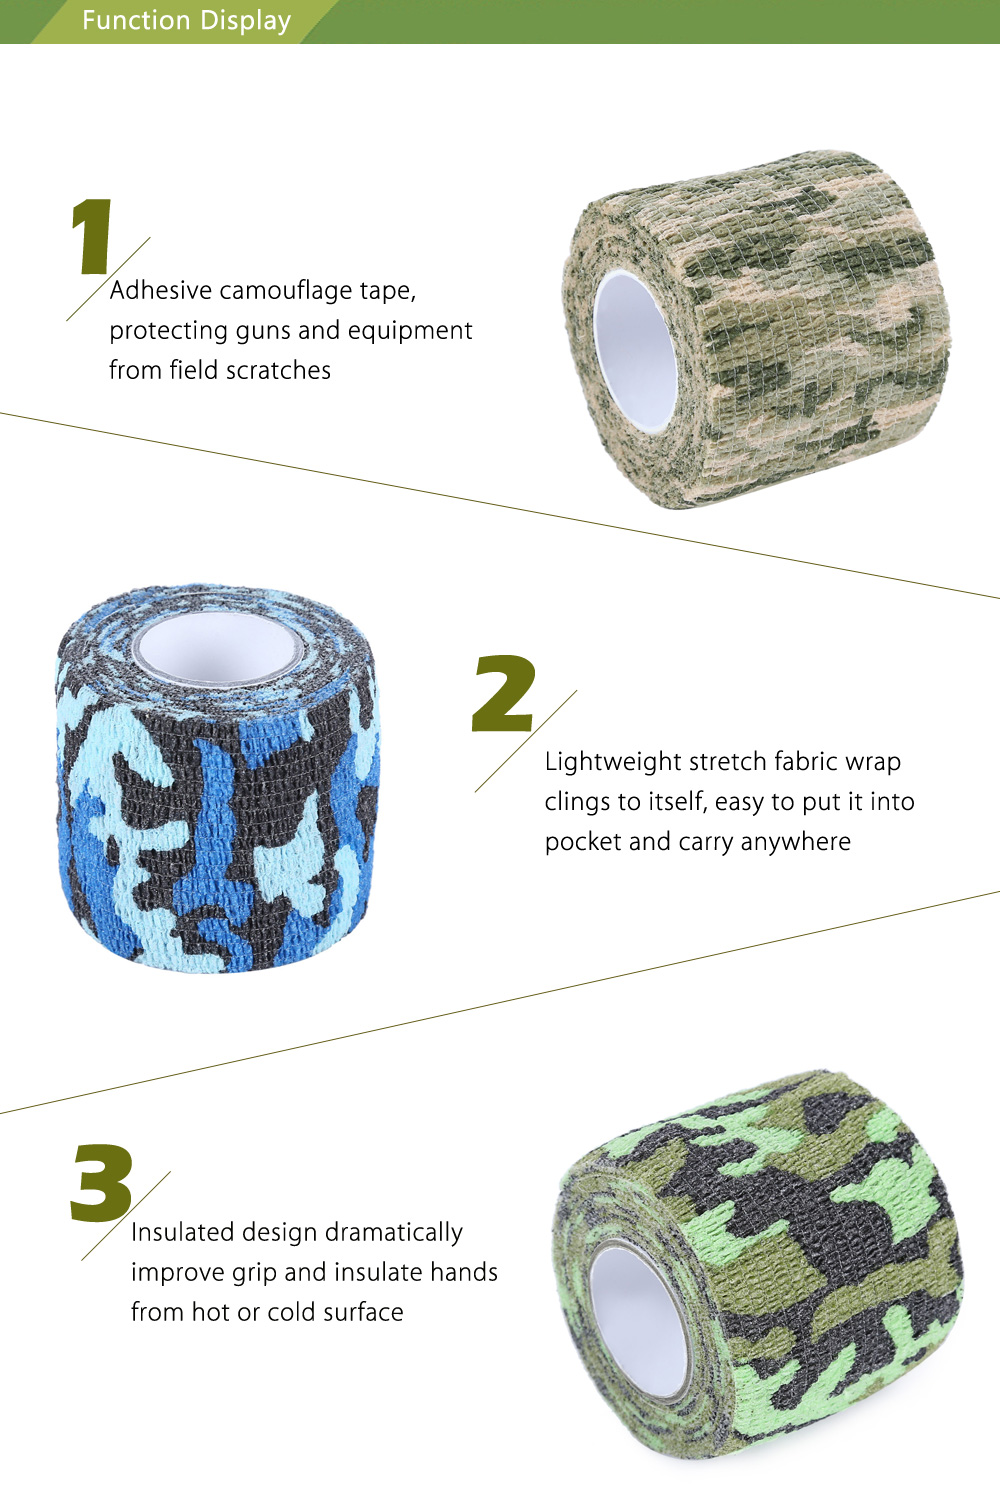 EDCGEAR 4.5M Outdoor Camouflage Non-woven Fabric Adhesive Tape